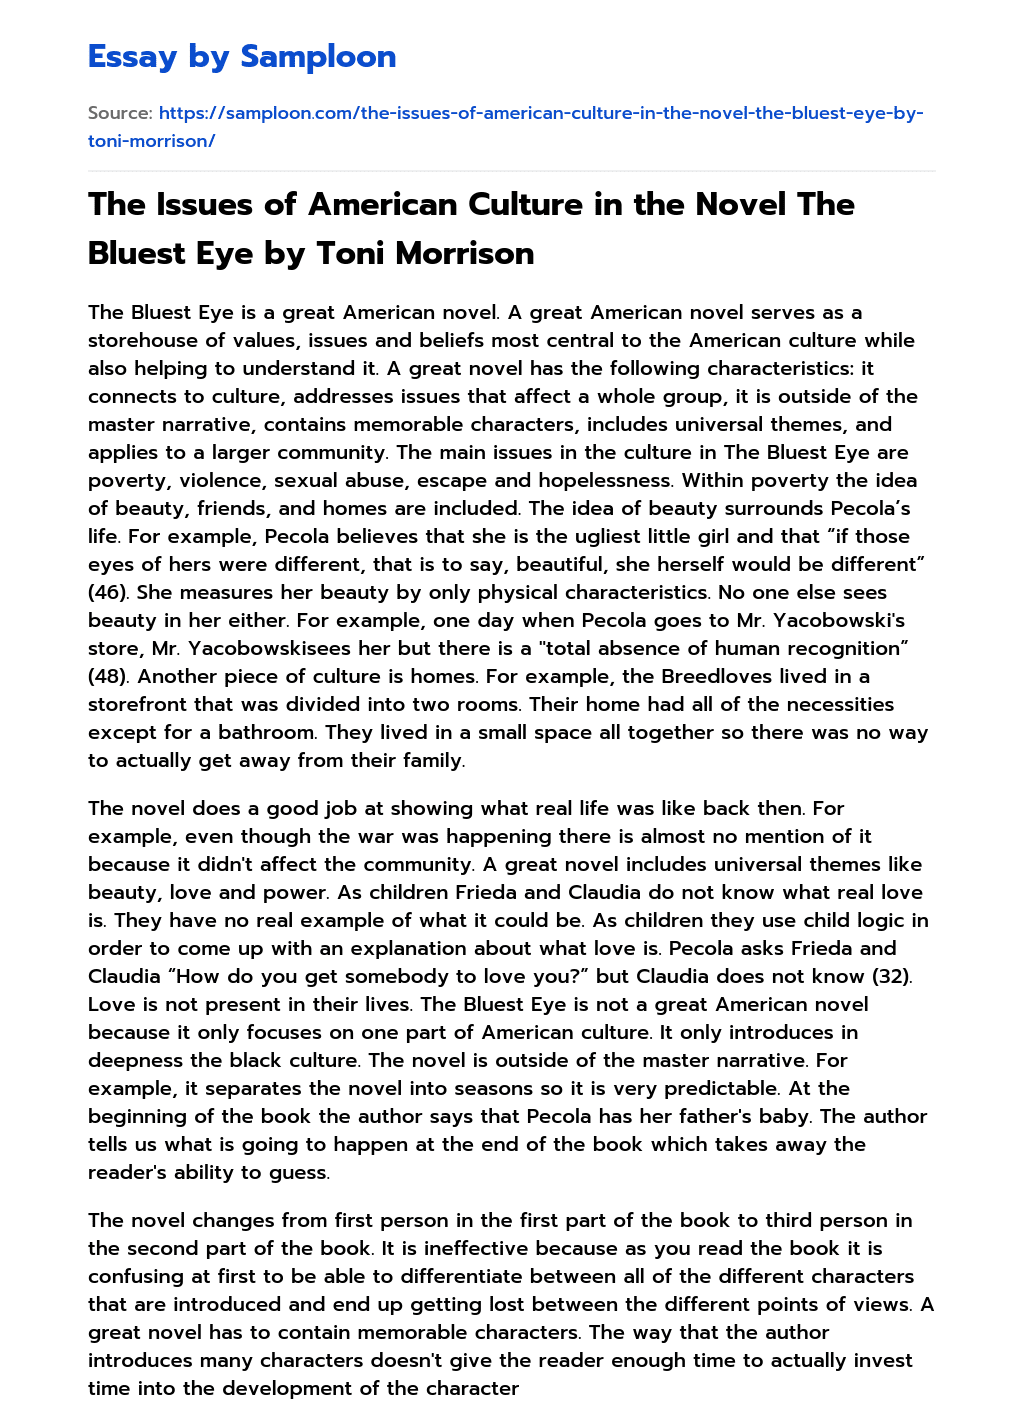 The Issues of American Culture in the Novel The Bluest Eye by Toni Morrison essay